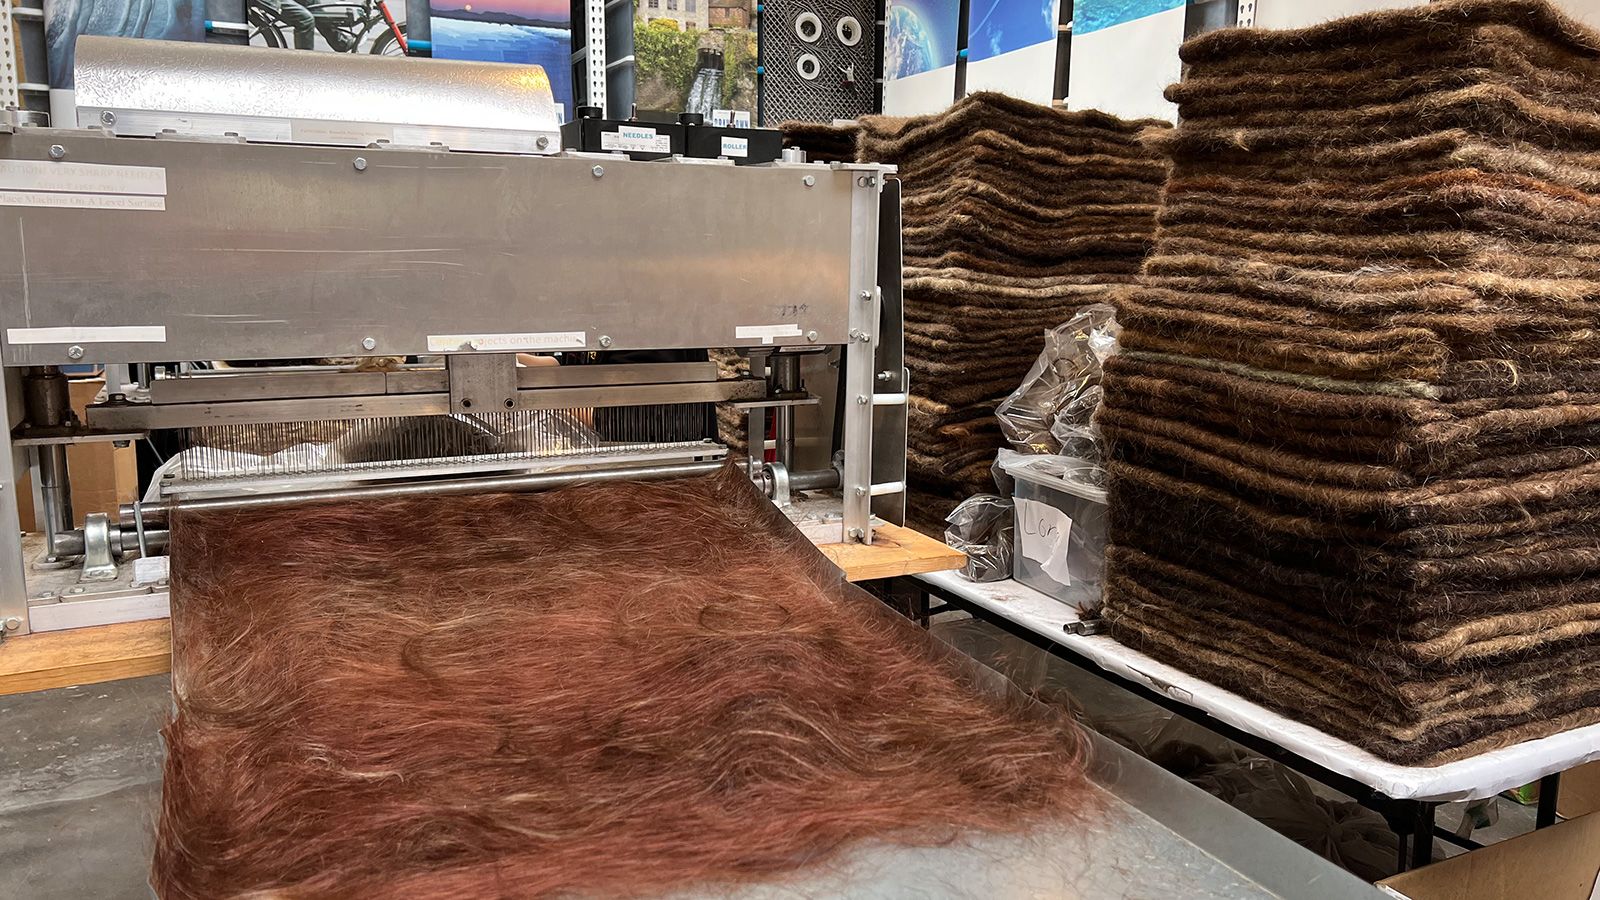 Mats made from human hair are cleaning up oil spills